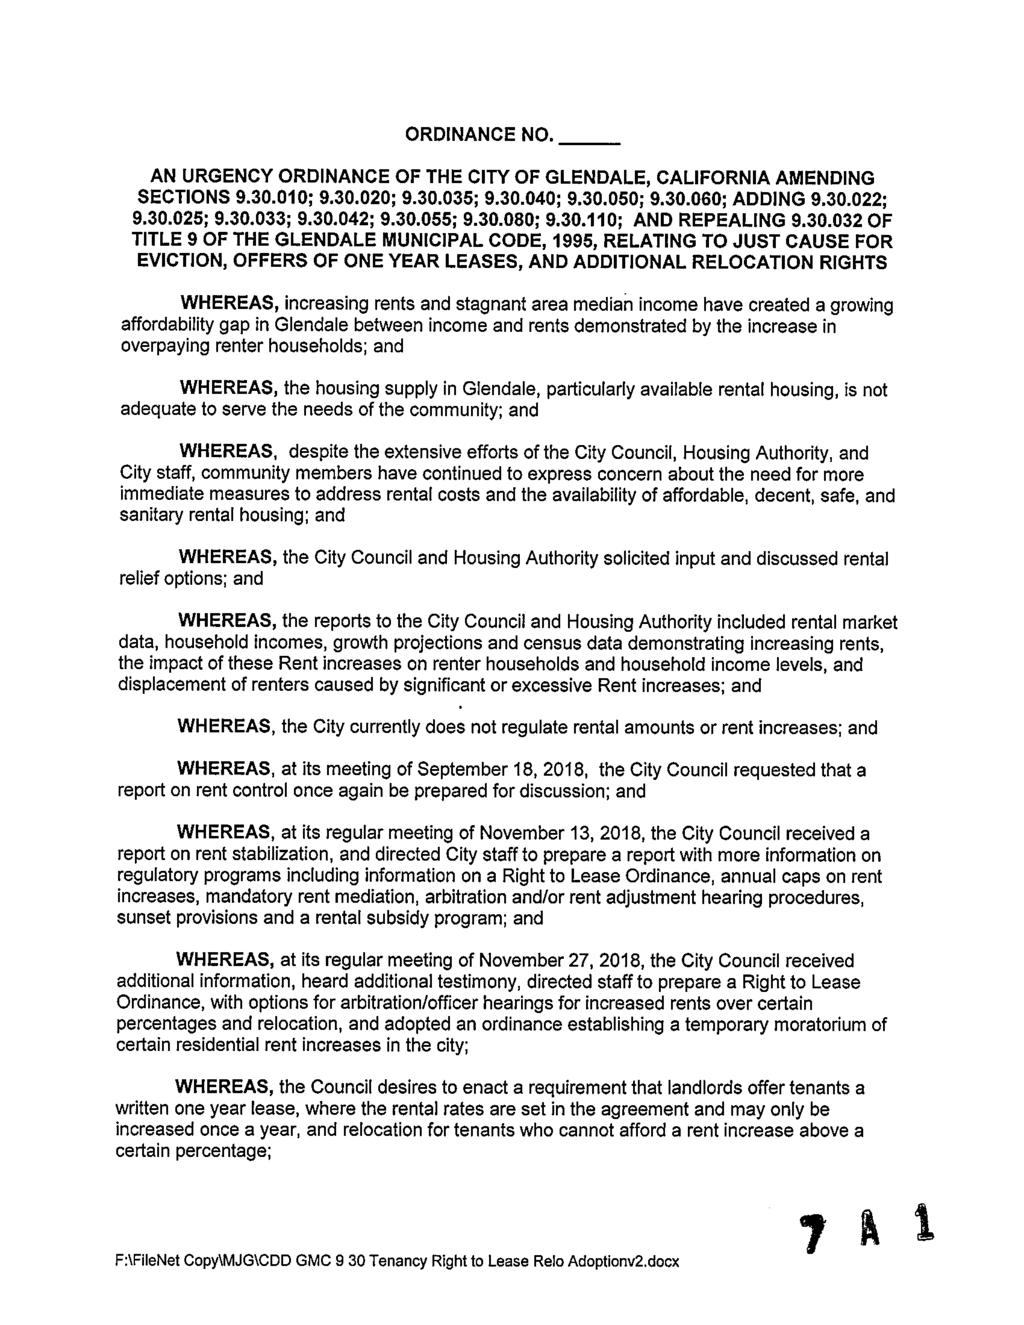 ORDINANCE NO. AN URGENCY ORDINANCE OF THE CITY OF GLENDALE, CALIFORNIA AMENDING SECTIONS 9.30.010; 9.30.020; 9.30.035; 9.30.040; 9.30.050; 9.30.060; ADDING 9.30.022; 9.30.025; 9.30.033; 9.30.042; 9.